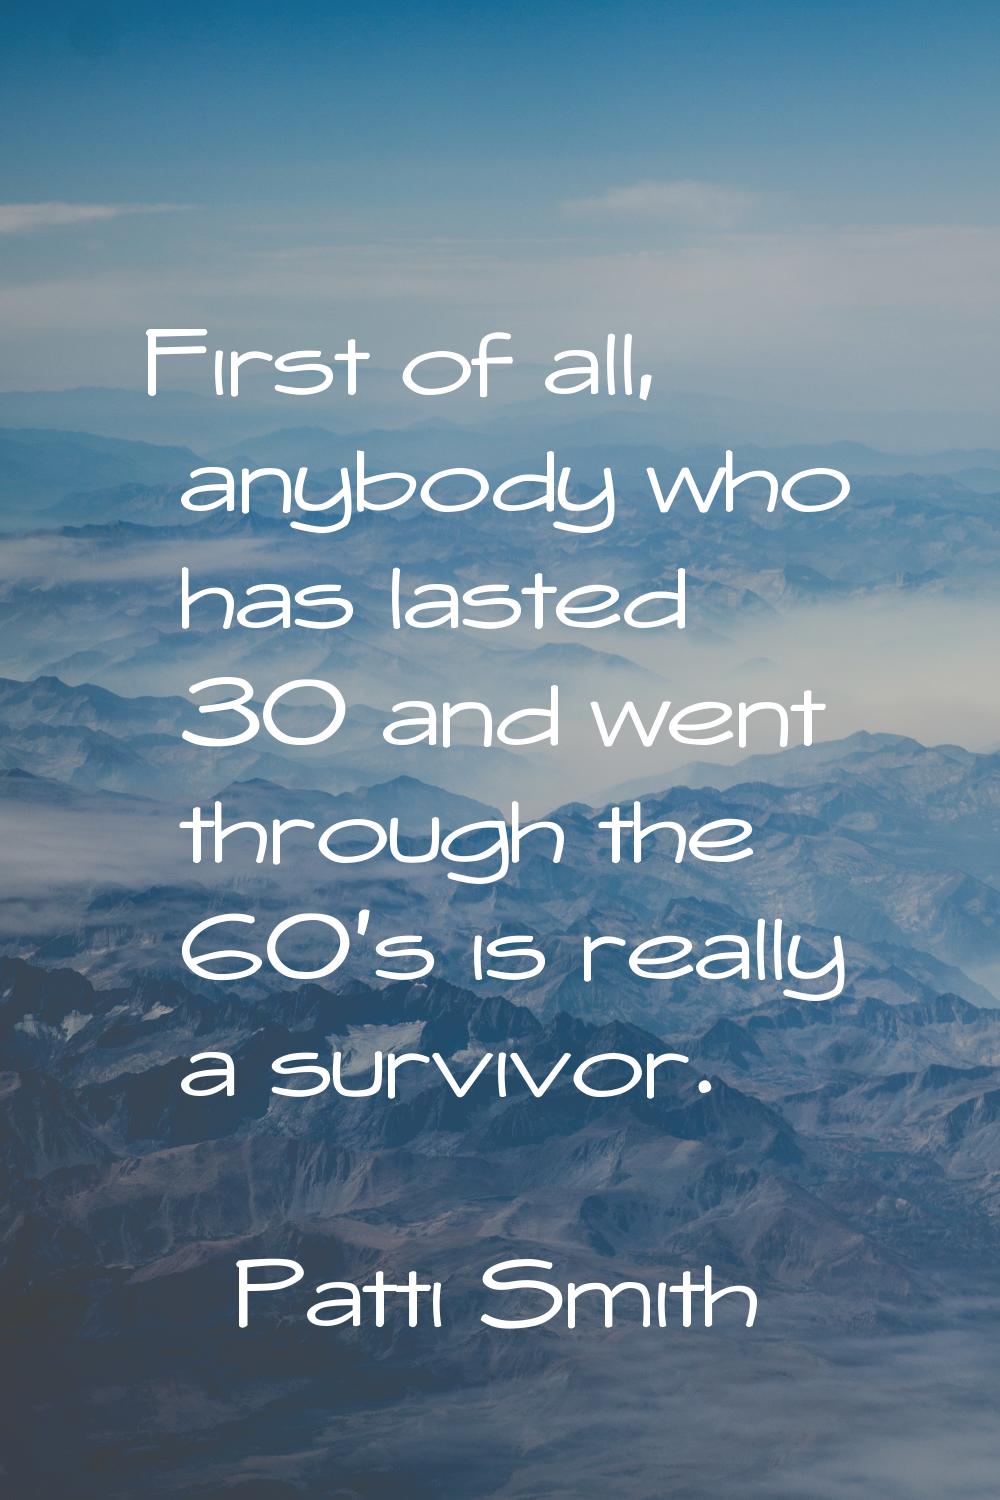 First of all, anybody who has lasted 30 and went through the 60's is really a survivor.